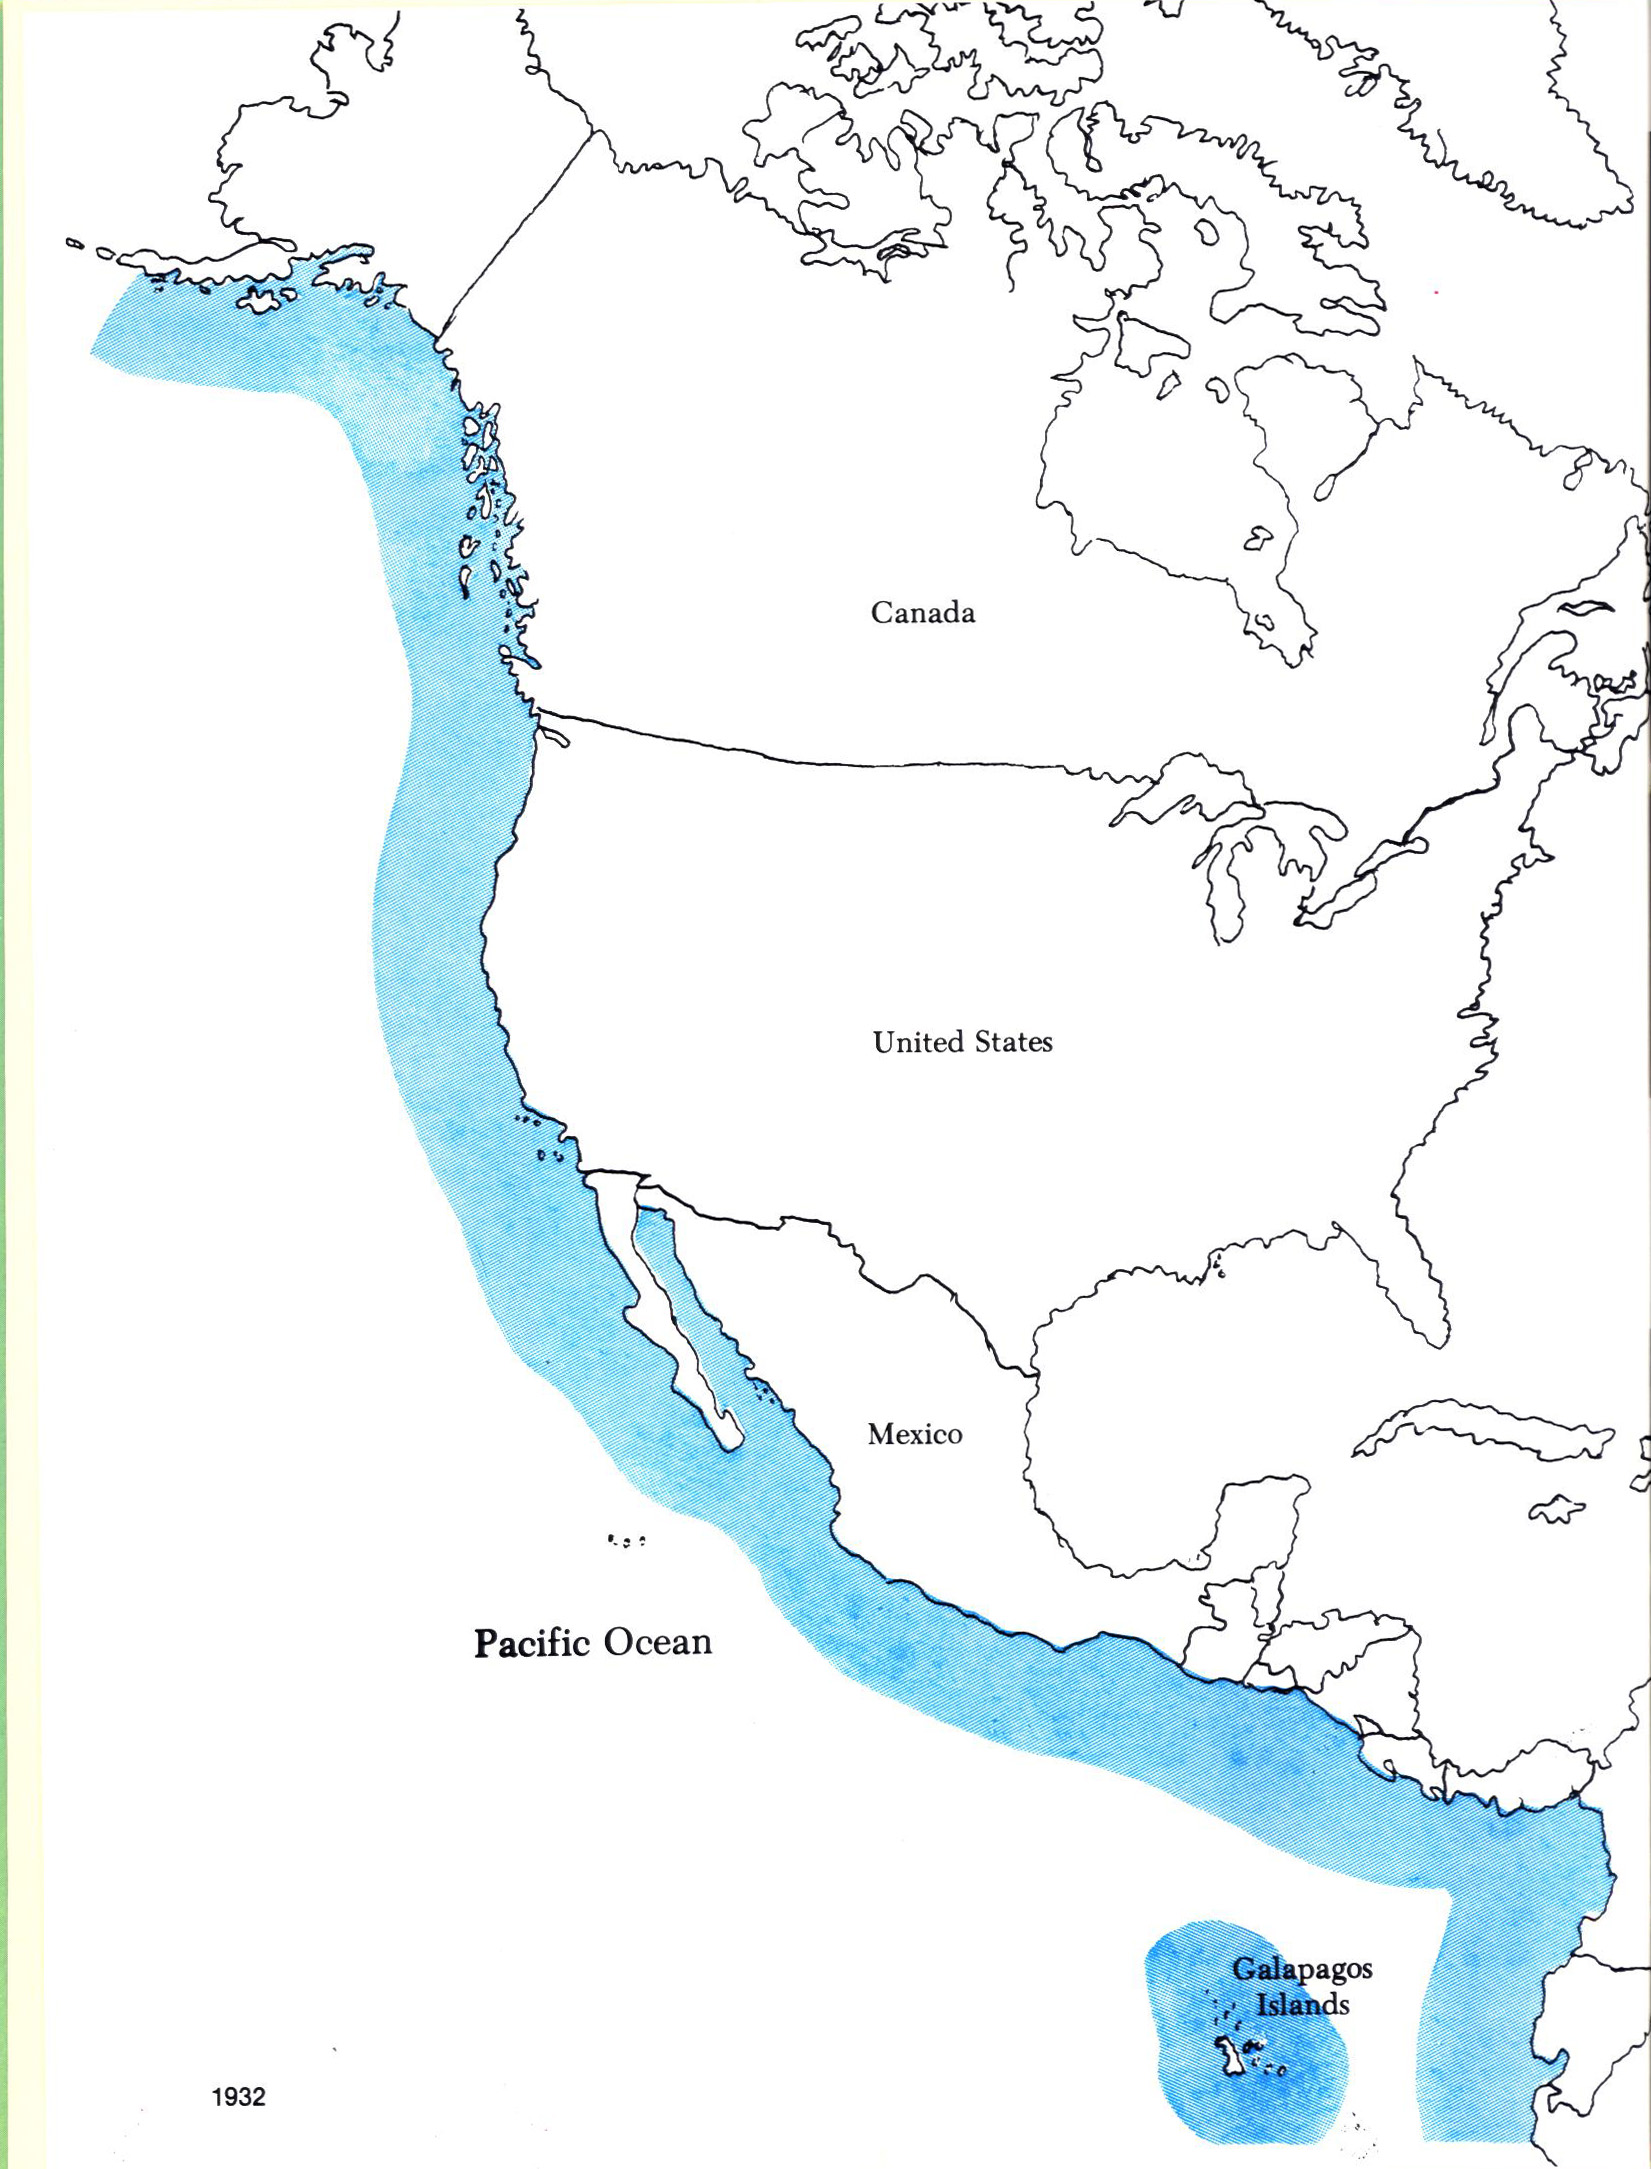 FISHES OF CALIFORNIA AND WESTERN MEXICO: Pacific marine fishes, Book 8 (California & Western Mexico). tfhp6102c